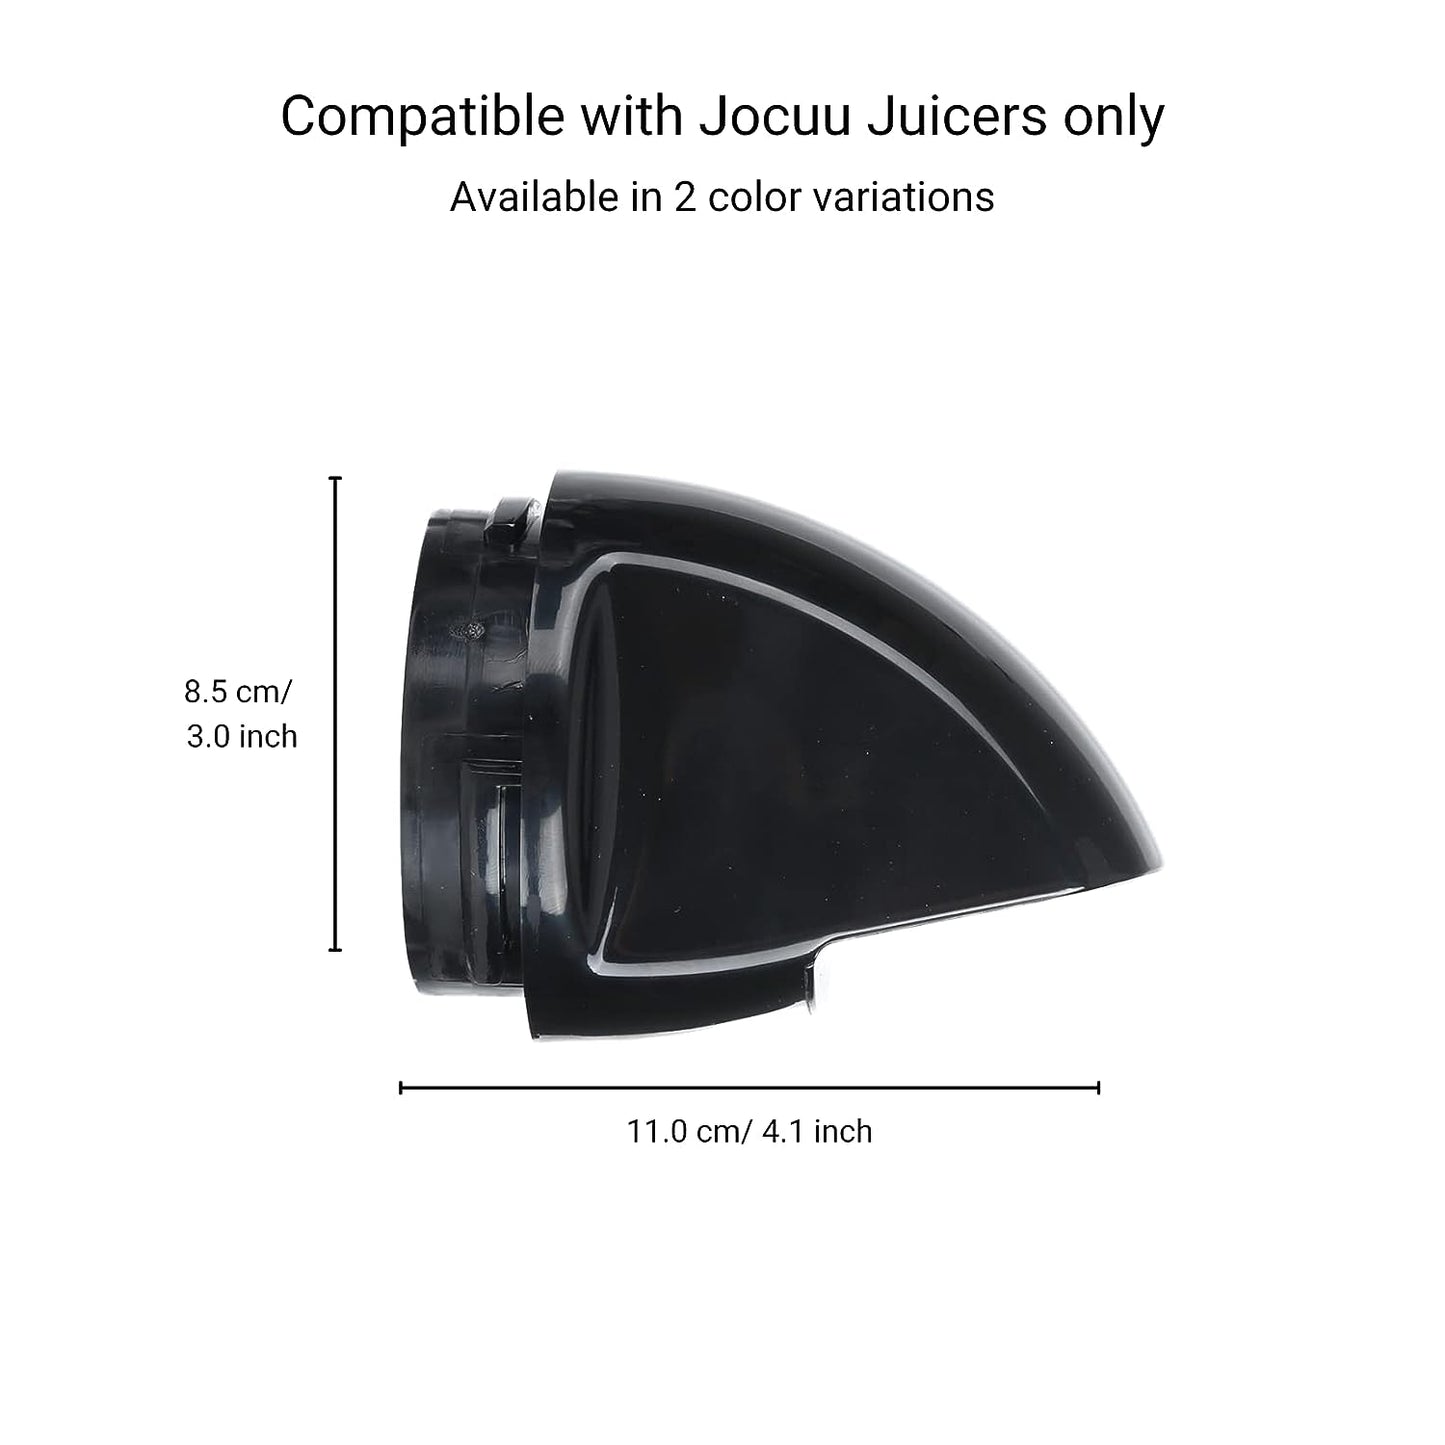 Jocuu Accessory No. 8 Juicer Squeezer, End Cap, Replacement Part for Slow Masticating Juicer ZM1503